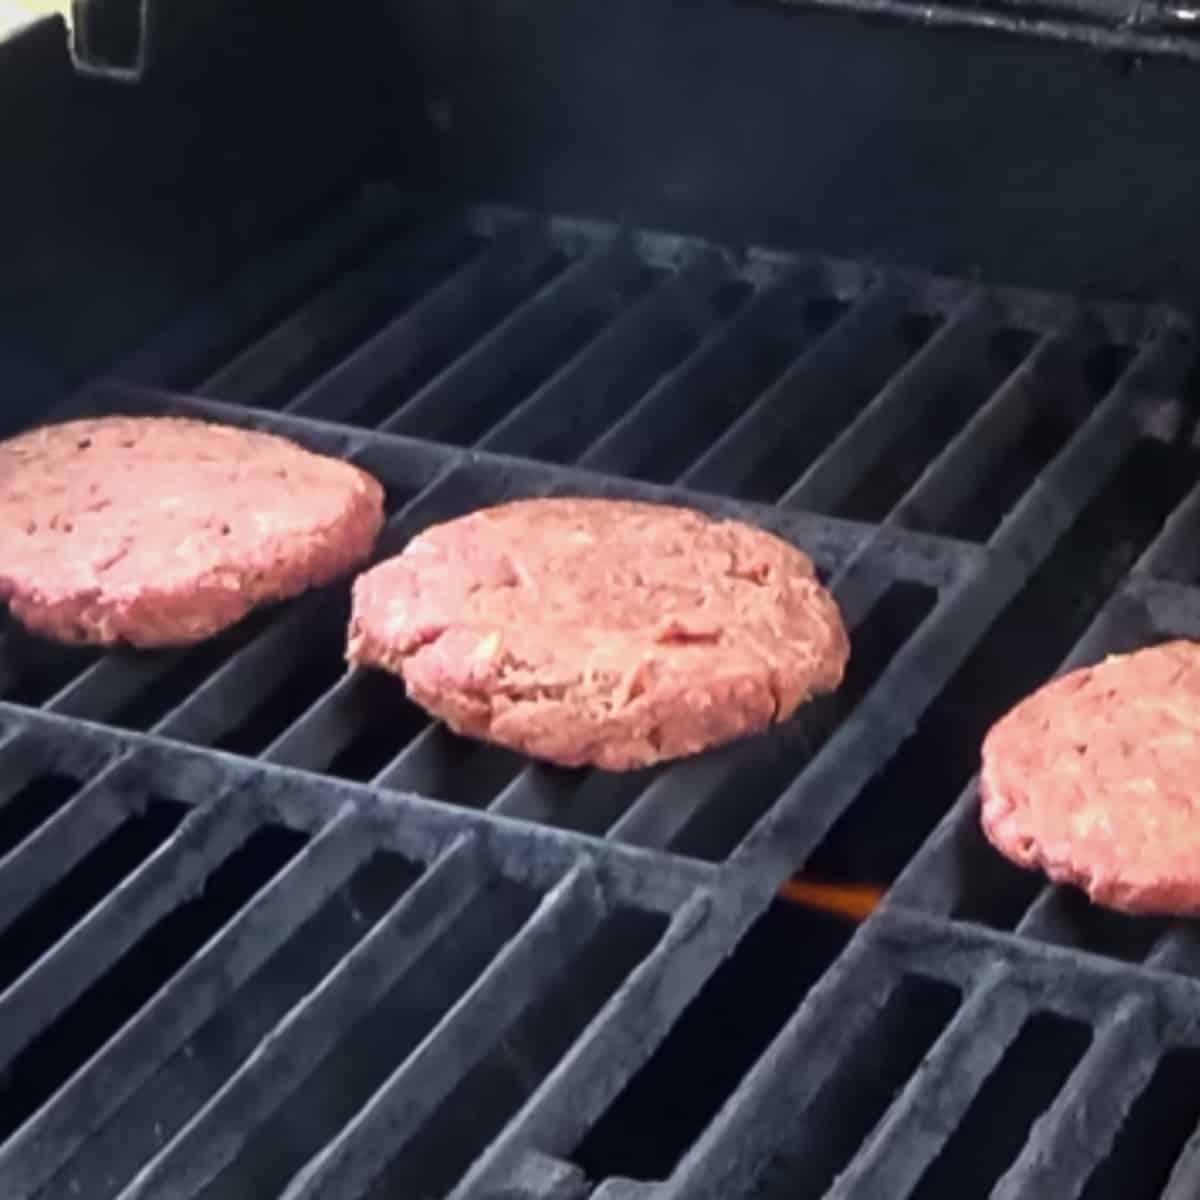 Deer burger patties being cooked on a outdoor gas grill.